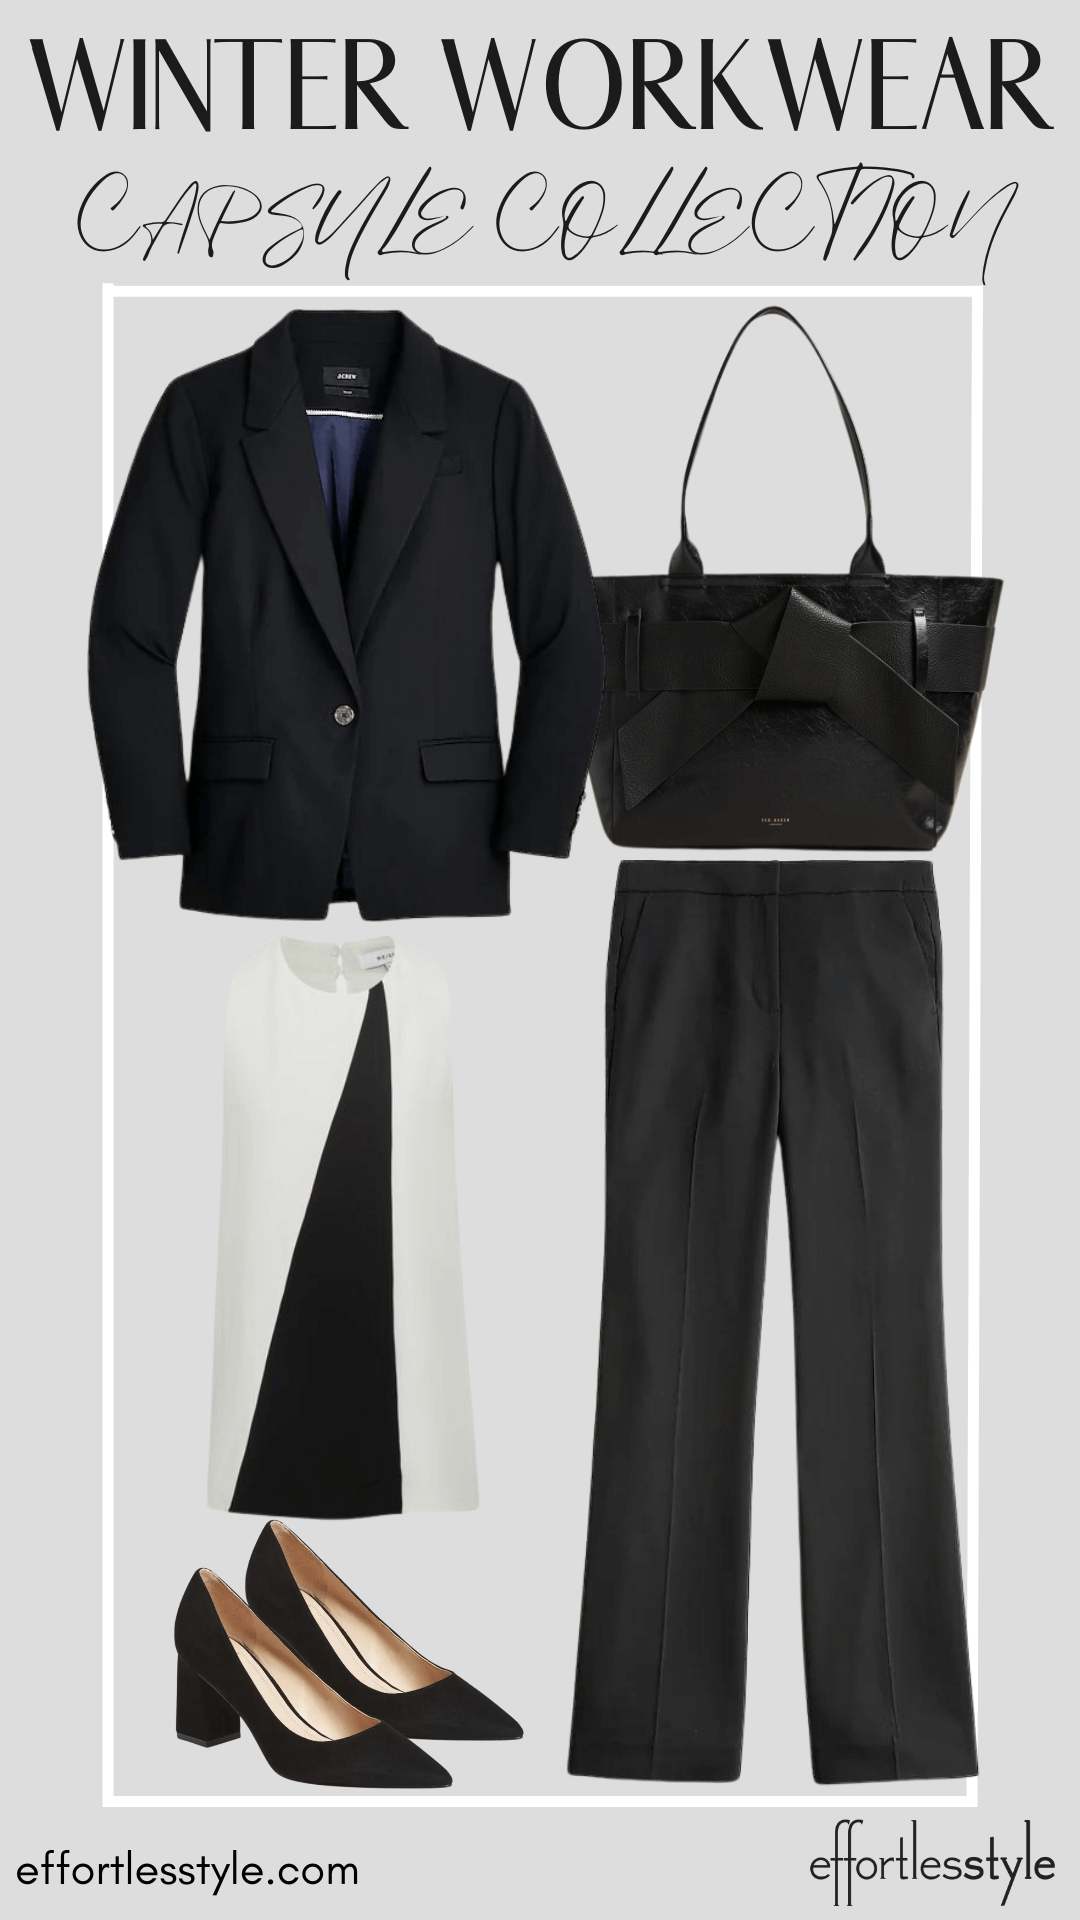 How To Wear Our Winter Workwear Capsule Wardrobe - Part 2 Sleeveless Blouse & Black Pants & Black Blazer how to style your suit for work fun ways to style a black suit how to wear black and white this winter how to color block for the office how to style a color blocked look for work